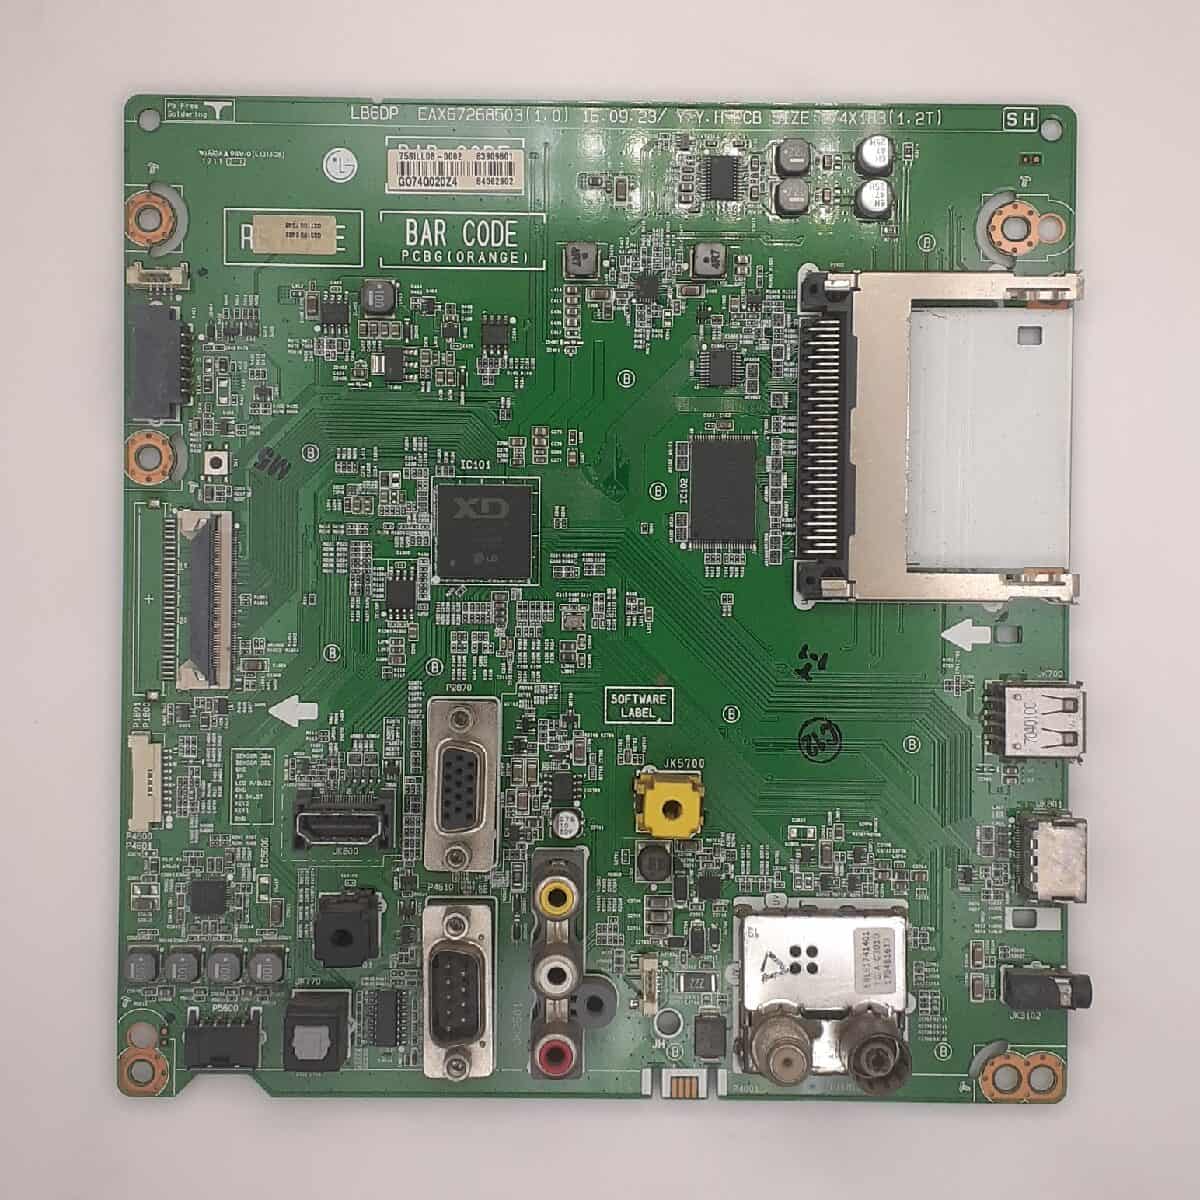 42LW342C-TA LG MOTHERBOARD FOR LED TV